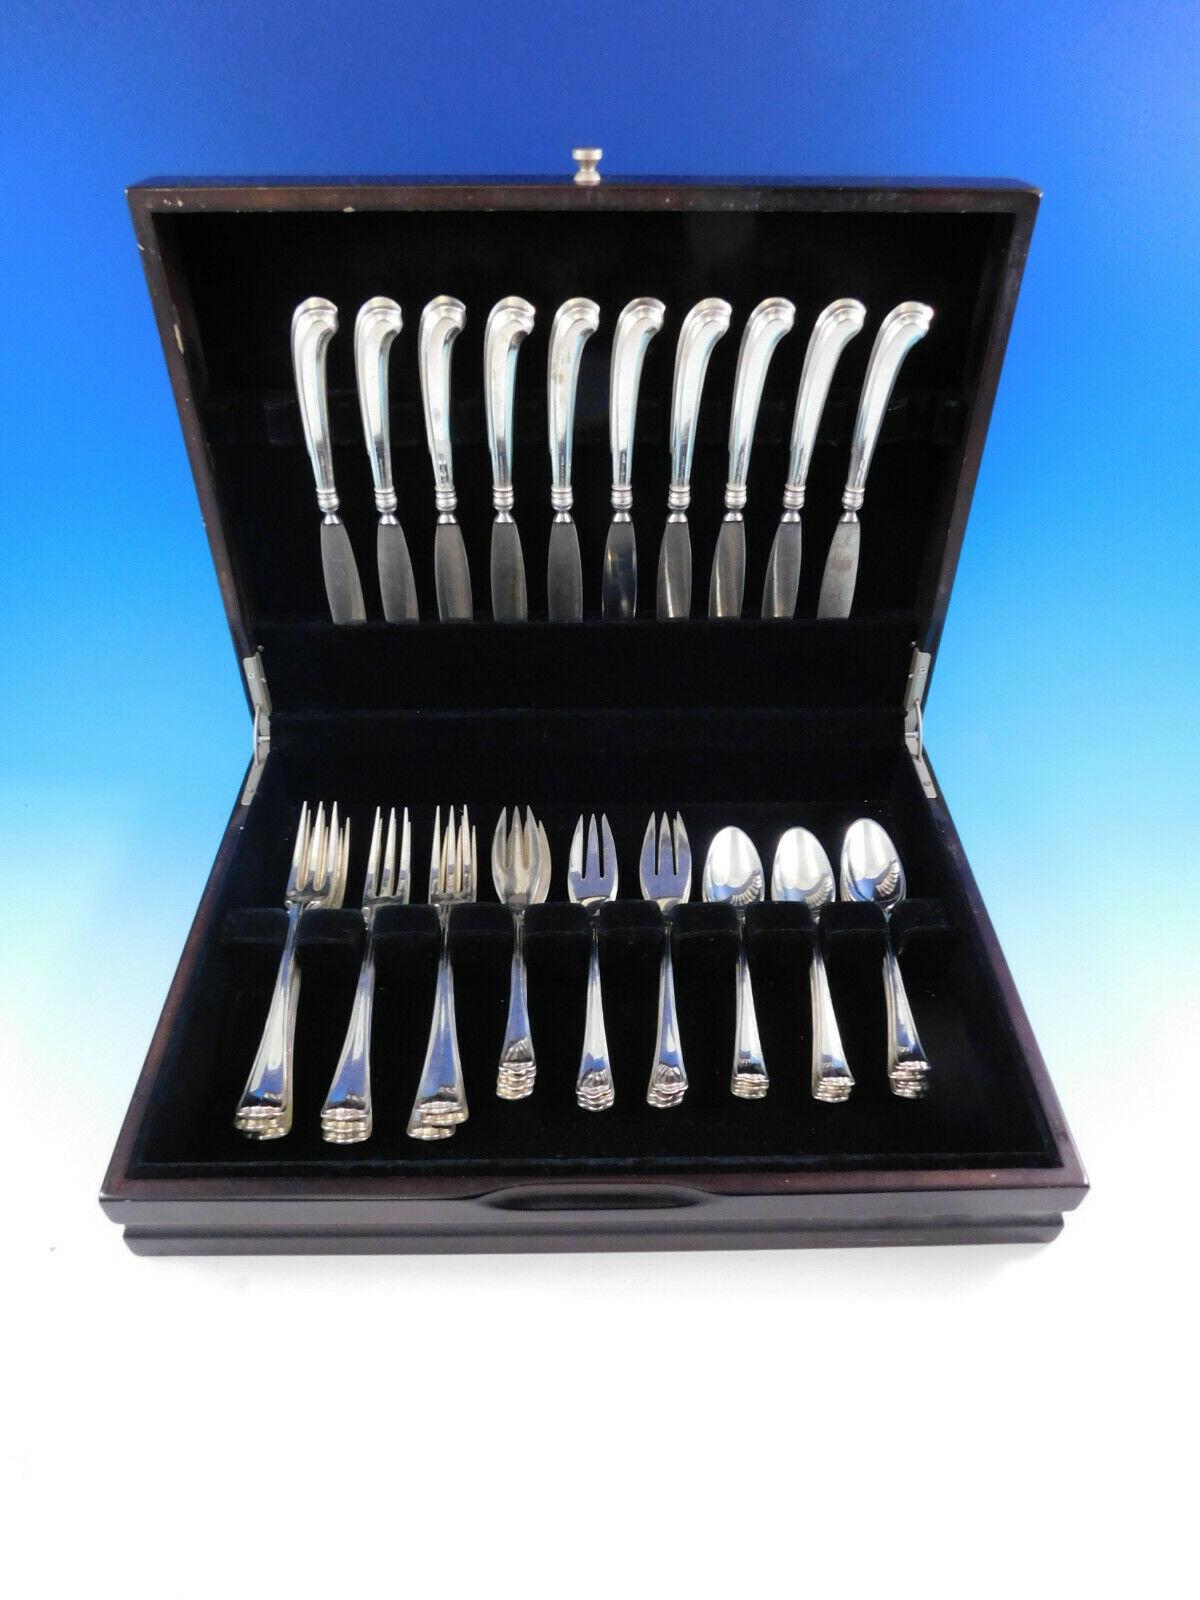 Superb Saint Mark by Buccellati Italy sterling silver flatware set - 40 pieces. This set includes:

10 regular knives, 8 5/8